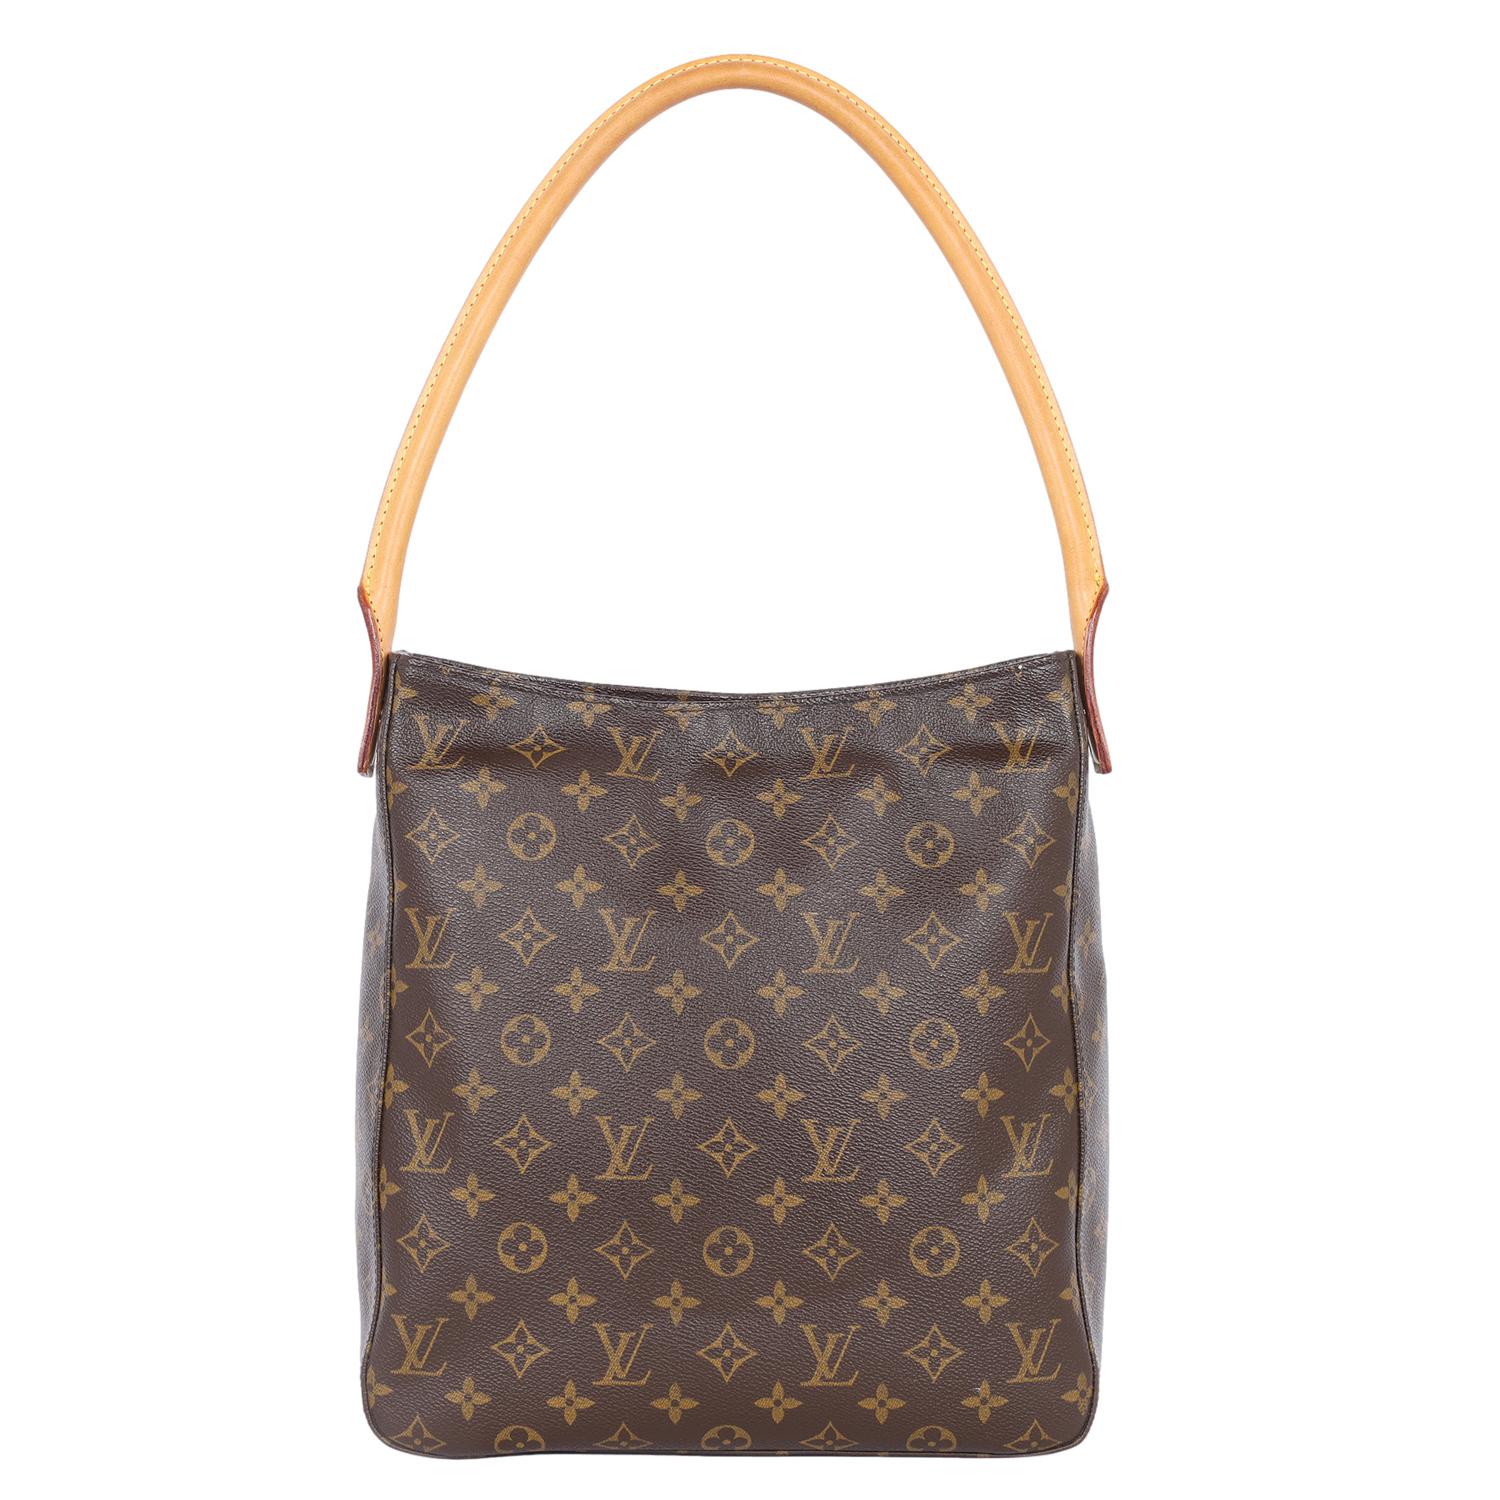 Authentic Louis Vuitton monogram canvas Looping GM shoulder bag. Features monogram canvas, movable leather looping shoulder strap, zipper top closure, large alcantara interior lining with a zipper and slip pocket.

Authenticity date code: SD0052 